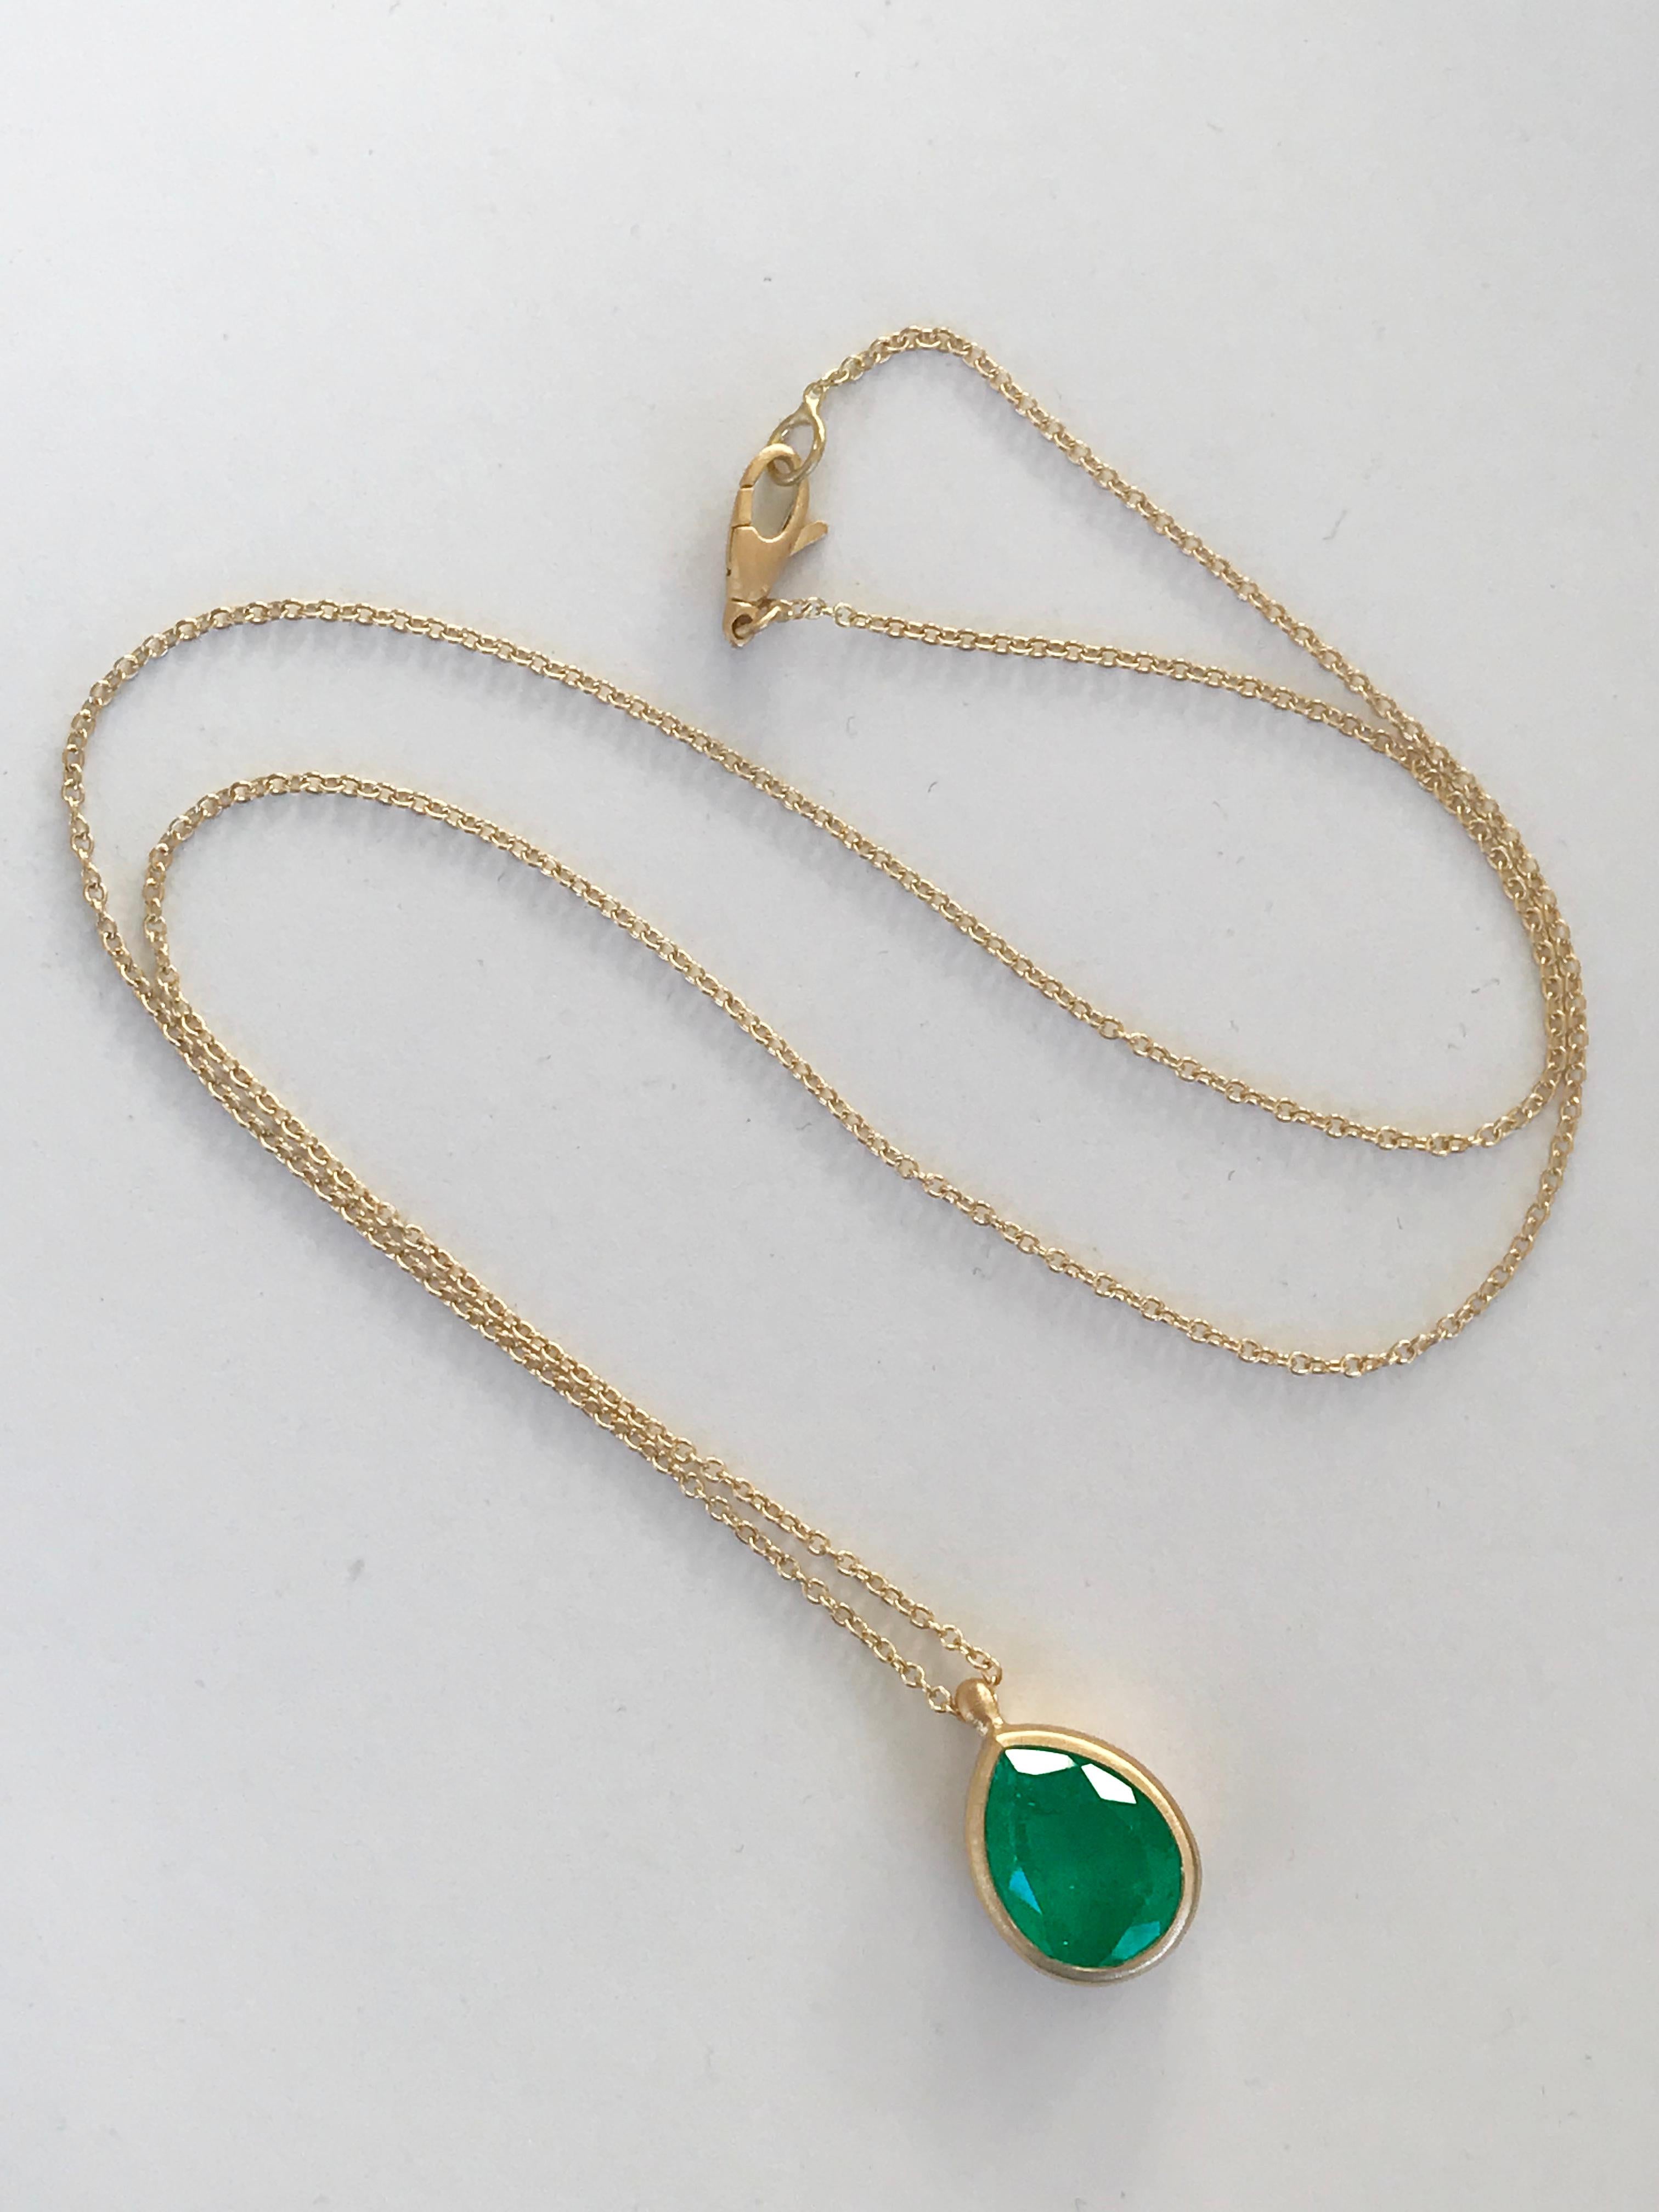 Dalben Design Emerald and Yellow Gold Necklace For Sale 4